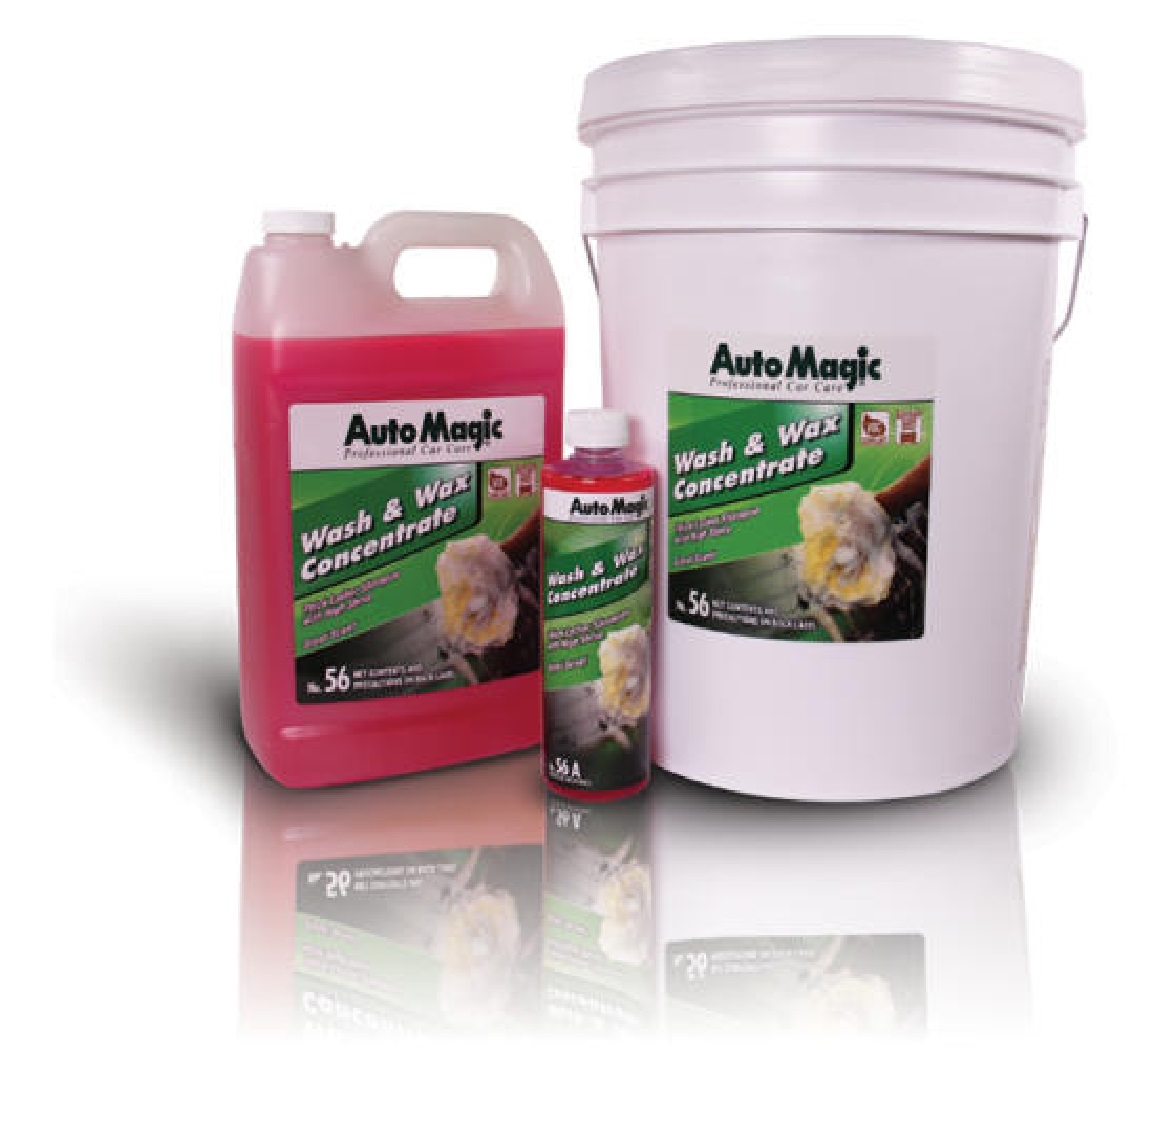 AM713 - SPECIAL CLEANER CONCENTRATE